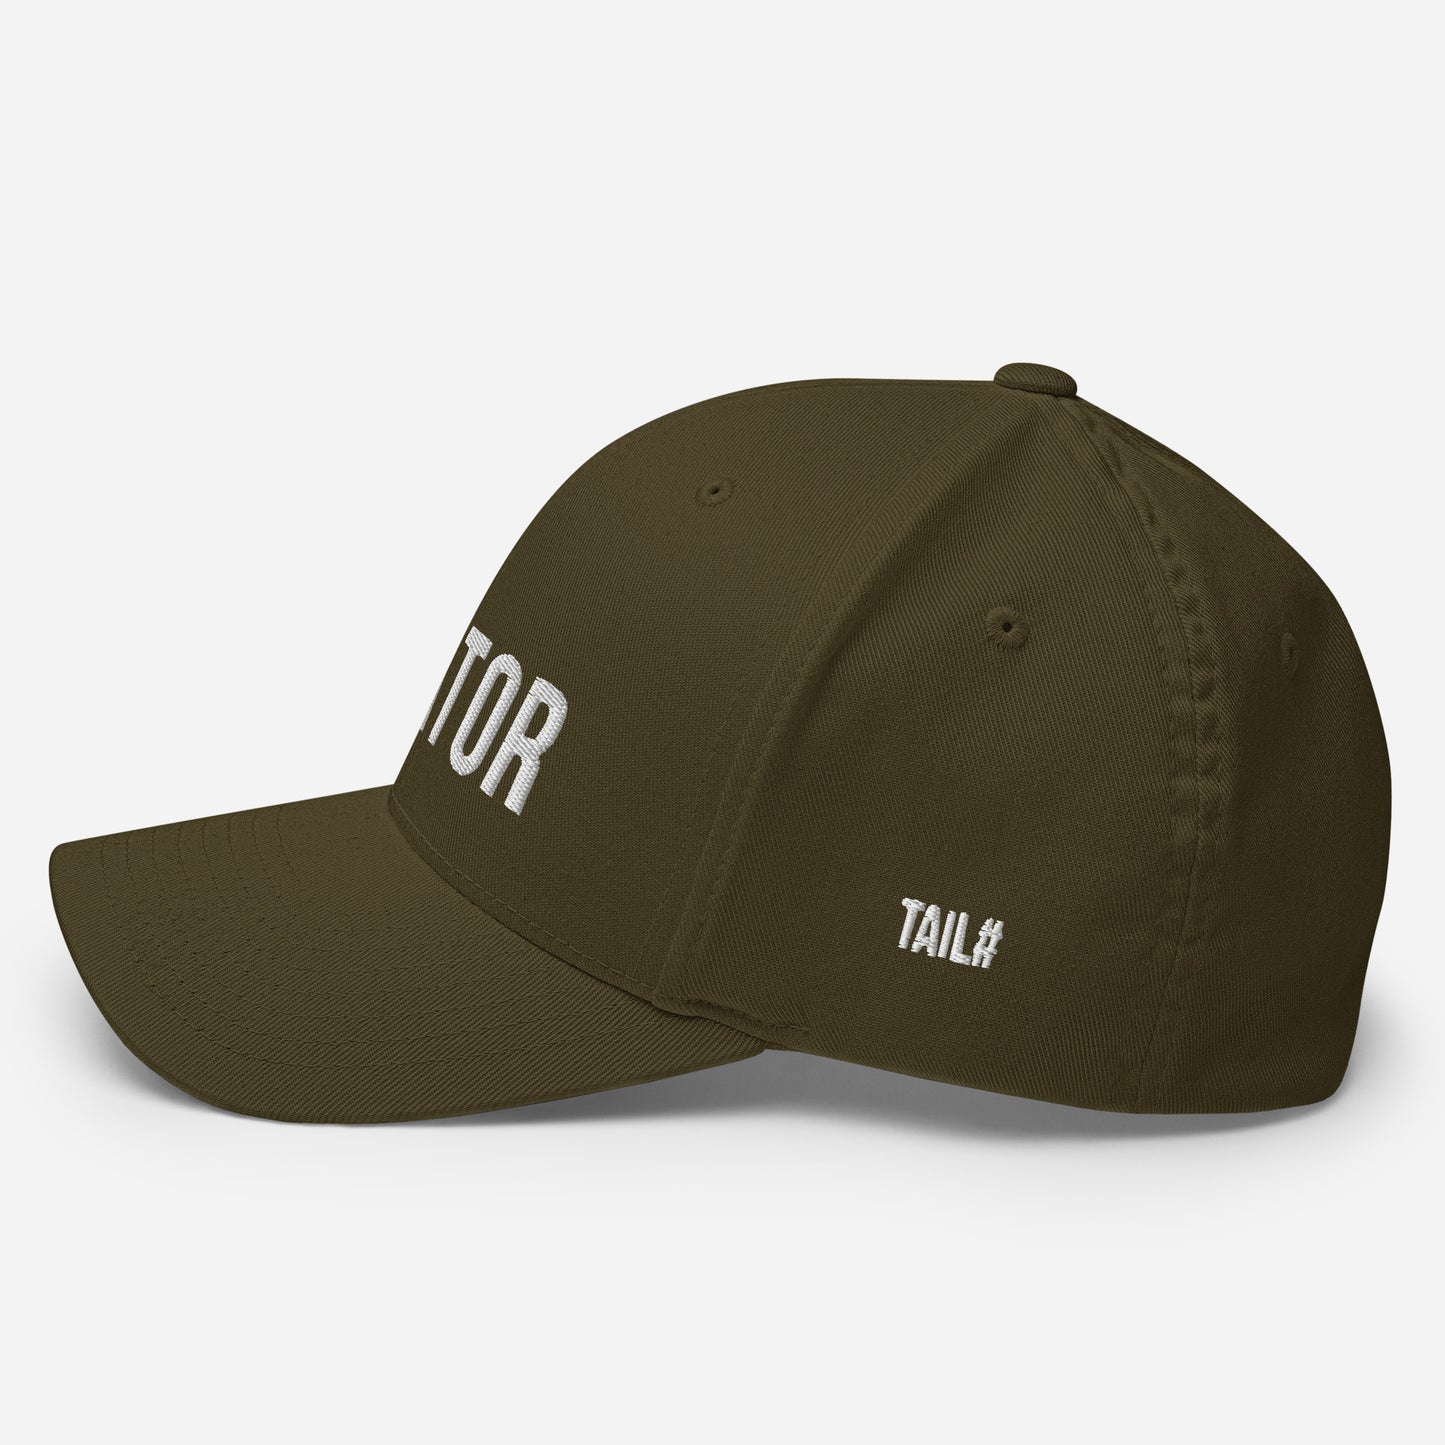 Aviator | Structured Hat | Customized Tail#